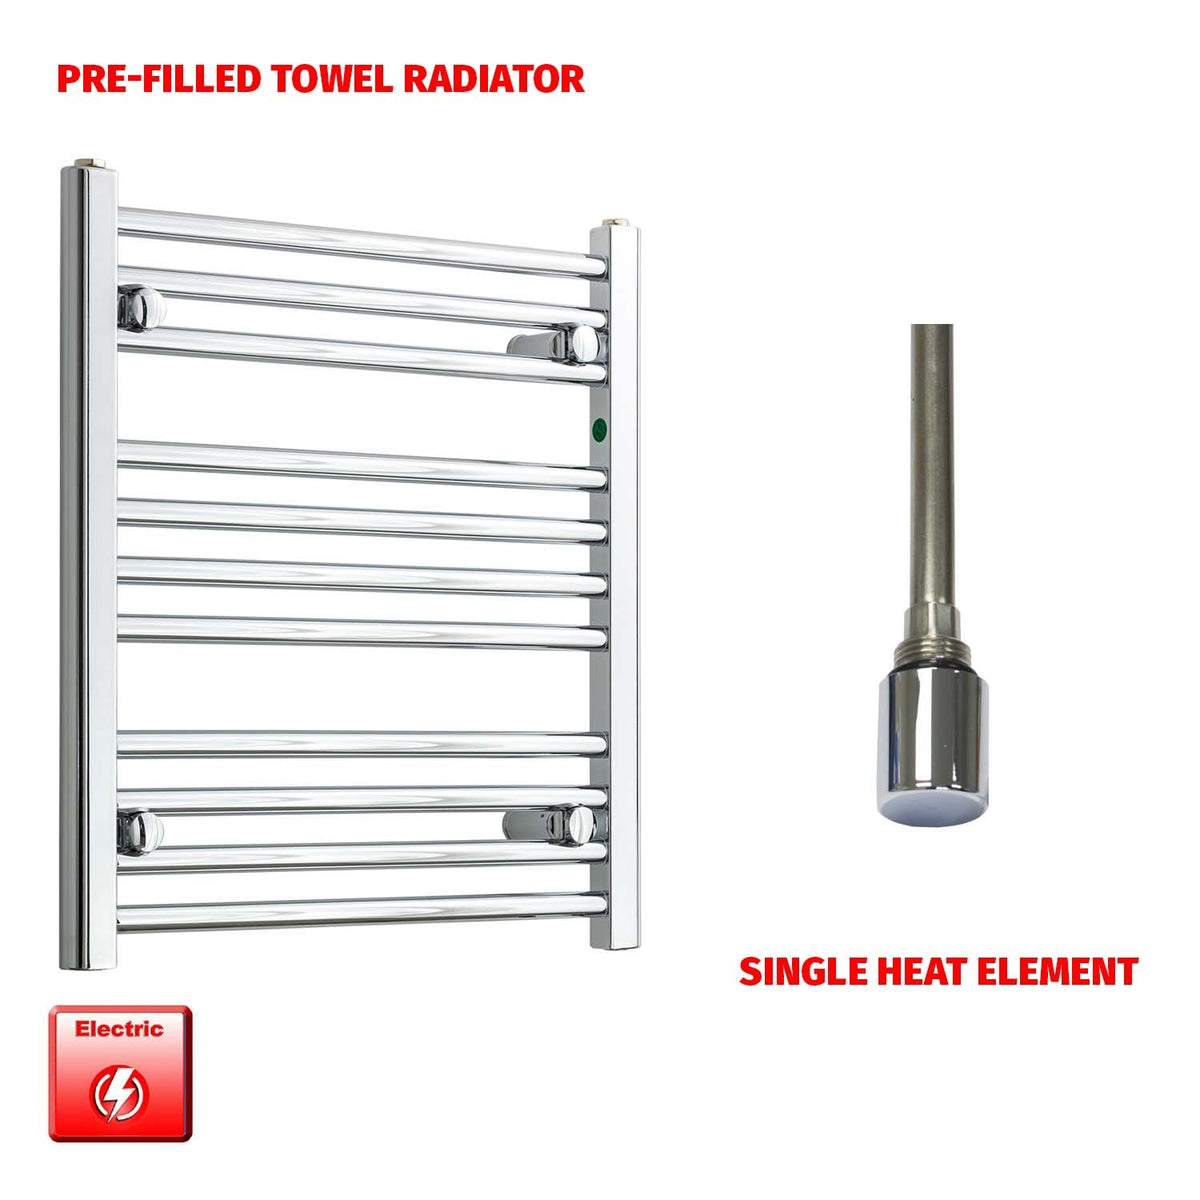 600mm High 500mm Wide Pre-Filled Electric Heated Towel Rail Radiator Straight or Curved Chrome Single heat element no timer